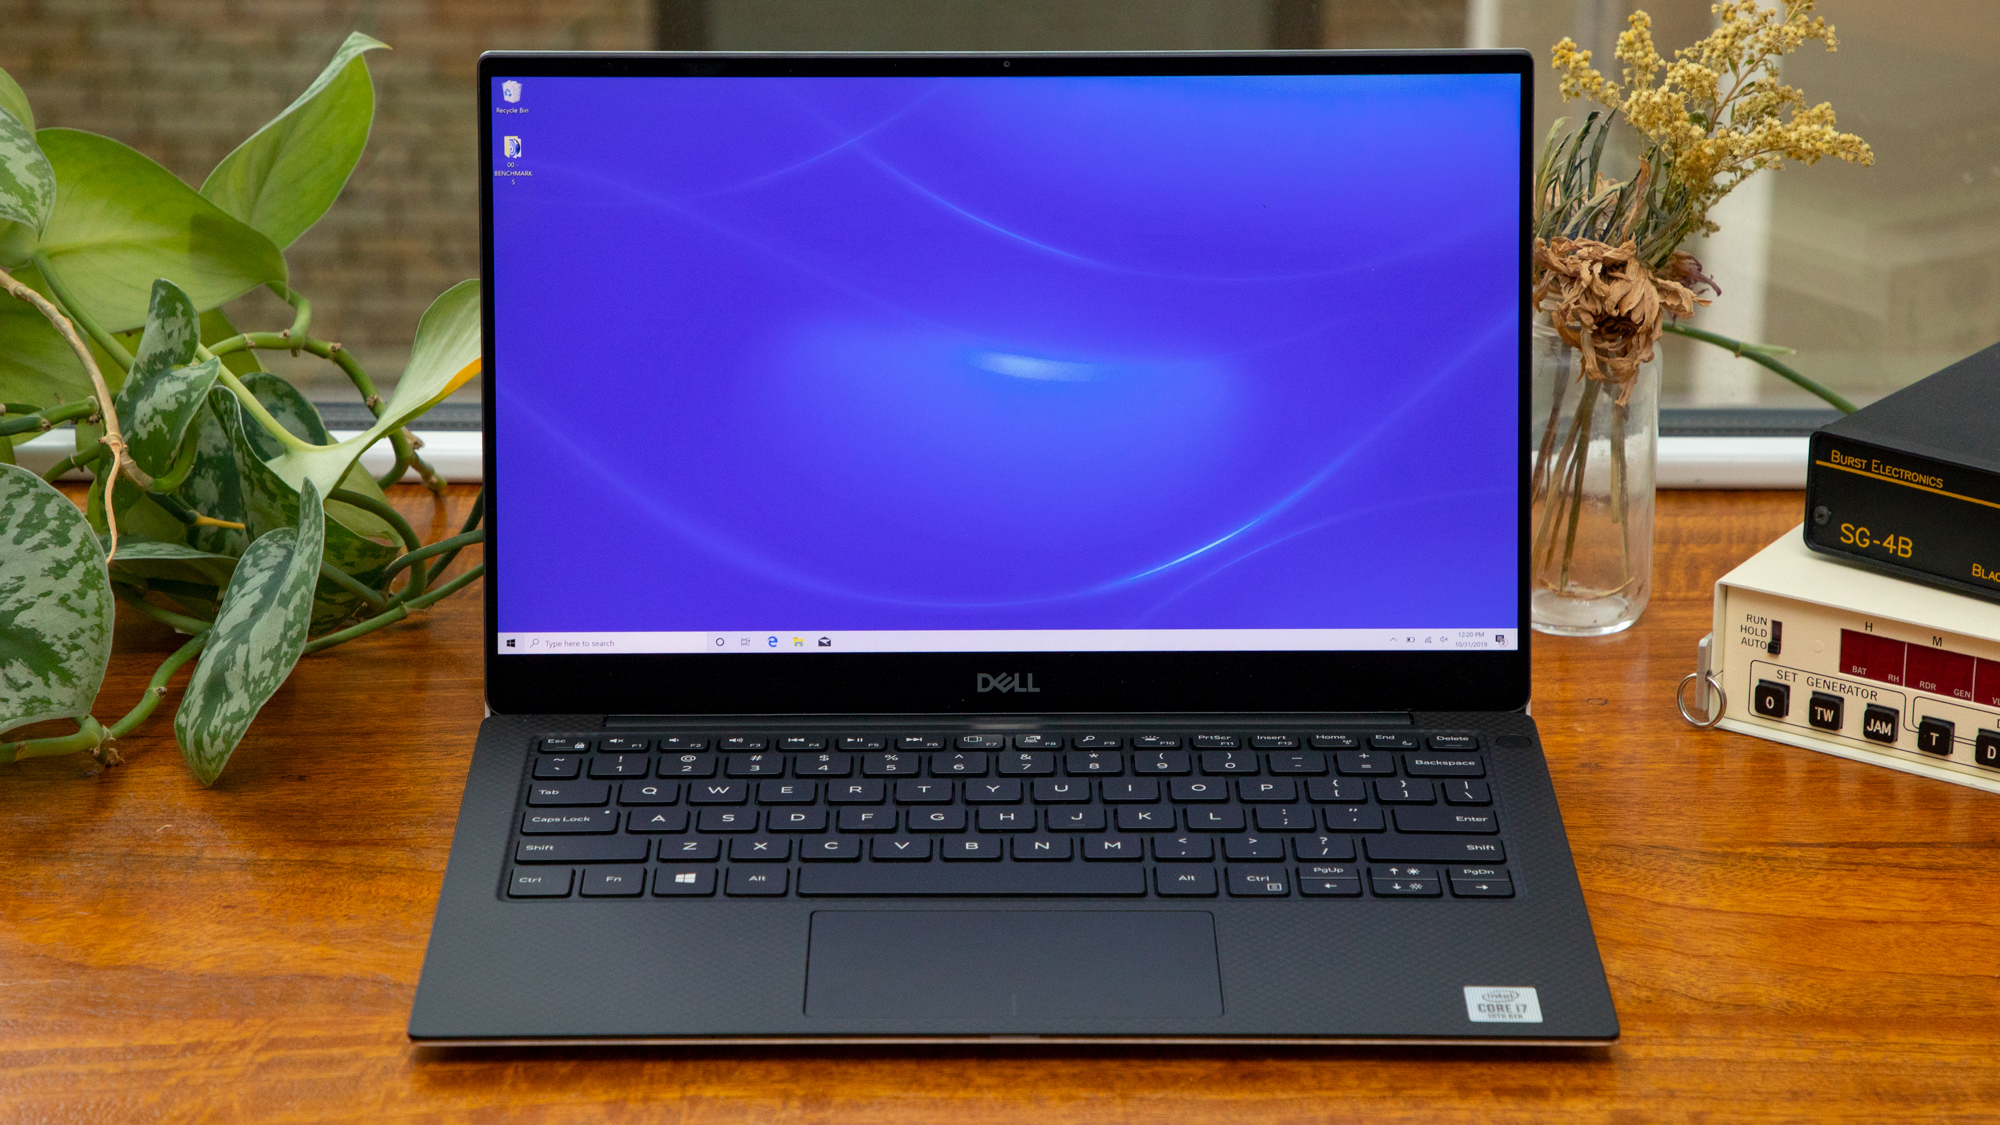 Dell XPS 13 (2019) Review: A Near-Perfect Laptop